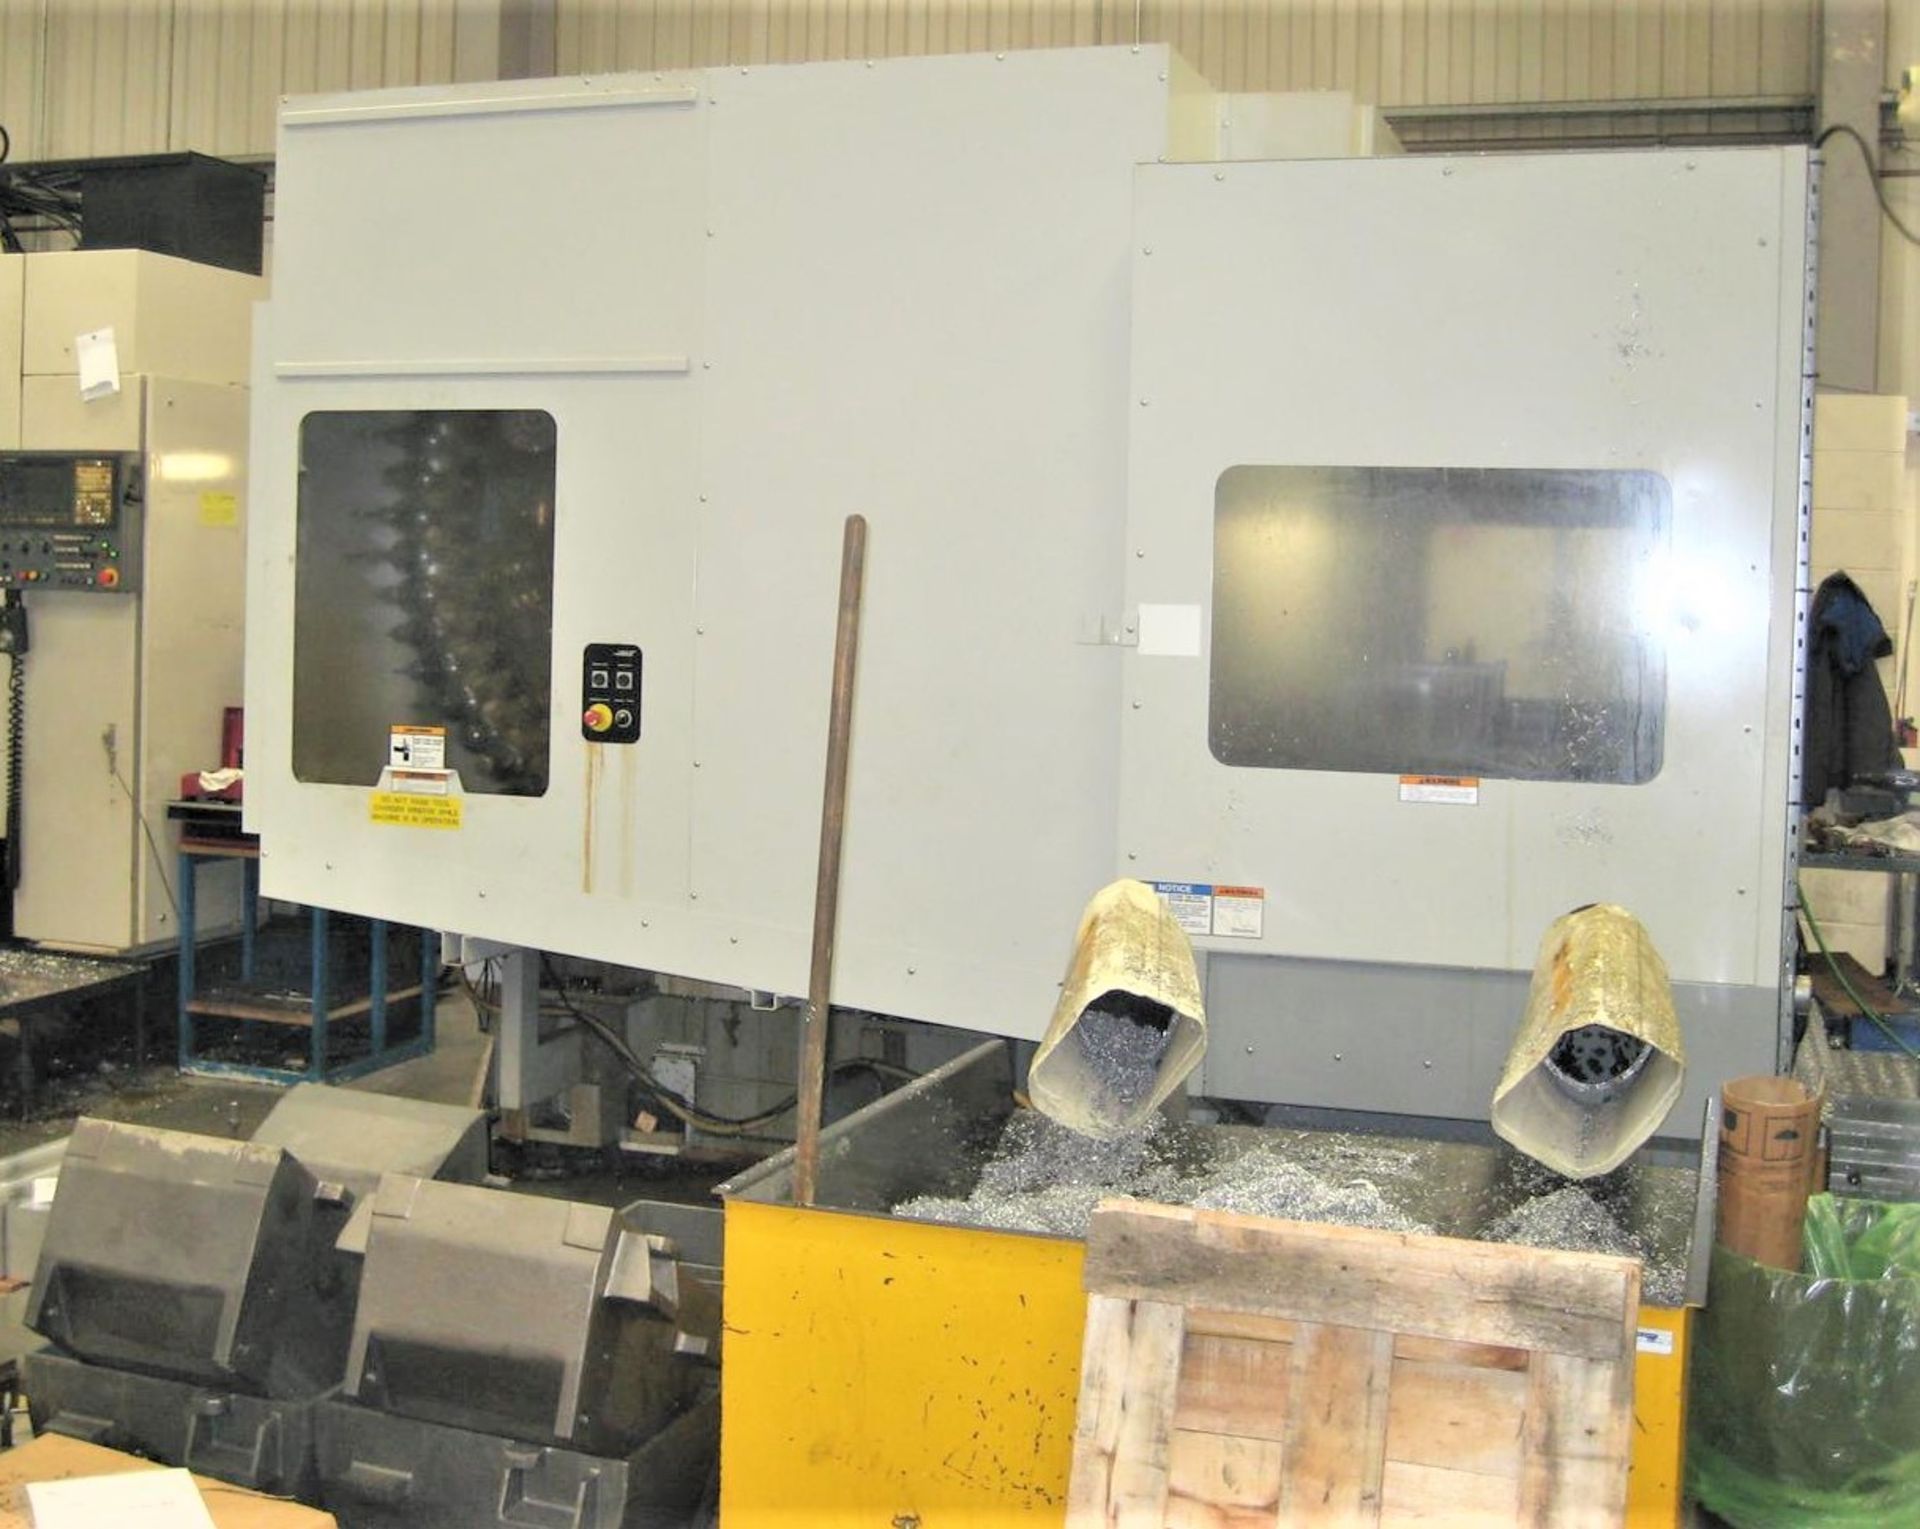 Haas EC-1600YZT CNC 4-Axis Horizontal Machining Center with Extended Z Travel, S/N 2052098, New 2008 - Image 6 of 12